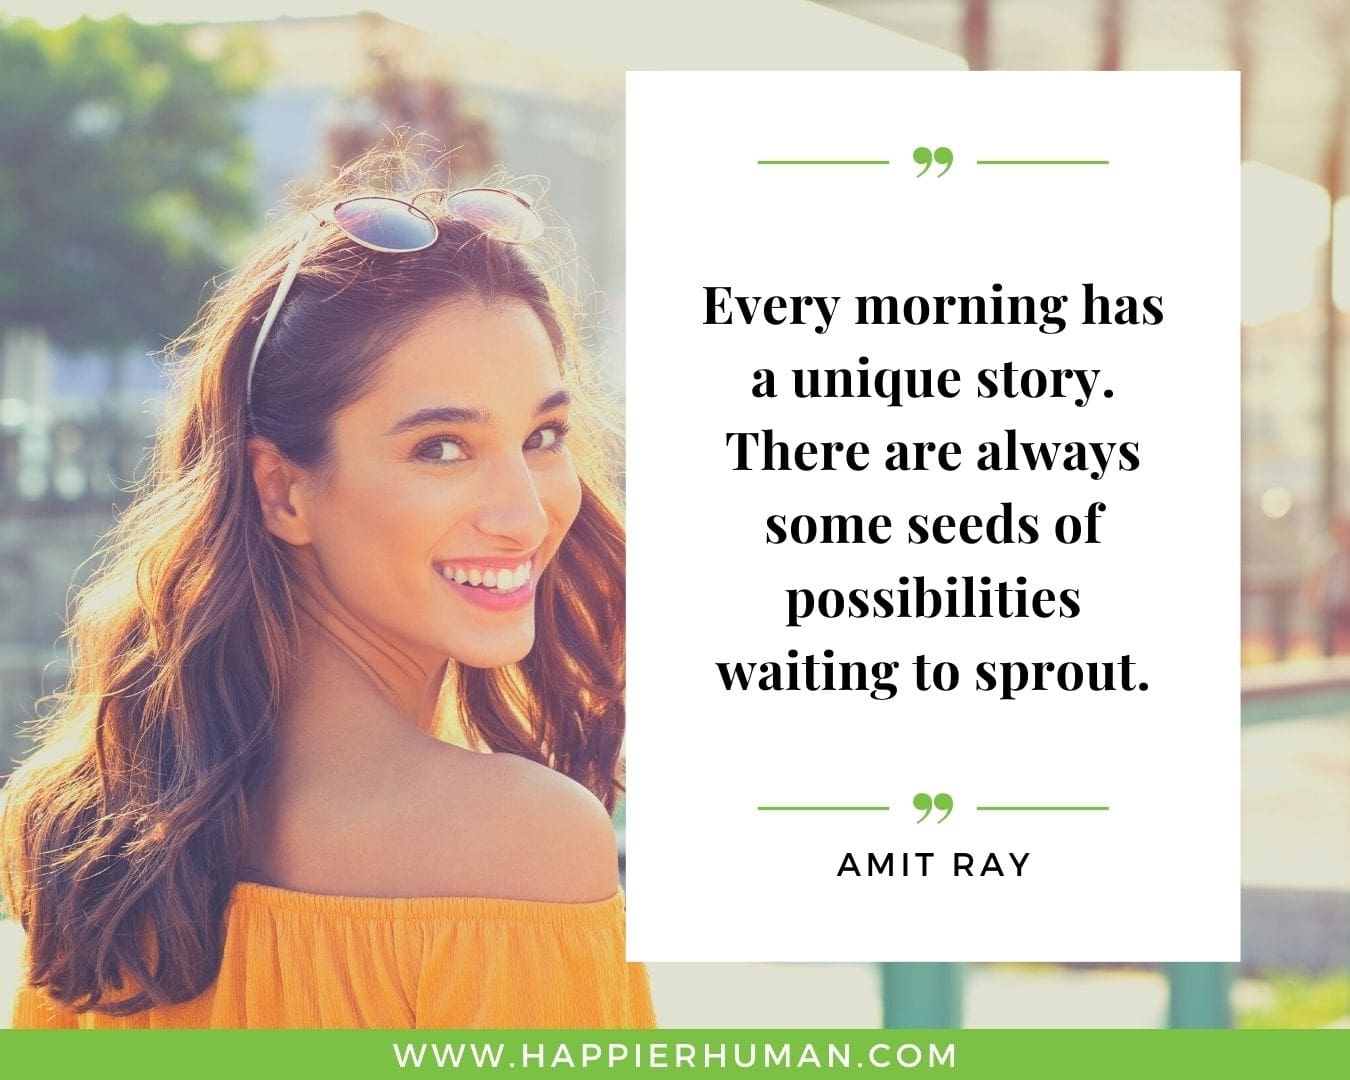 Positive Energy Quotes - “Every morning has a unique story. There are always some seeds of possibilities waiting to sprout.” - Amit Ray